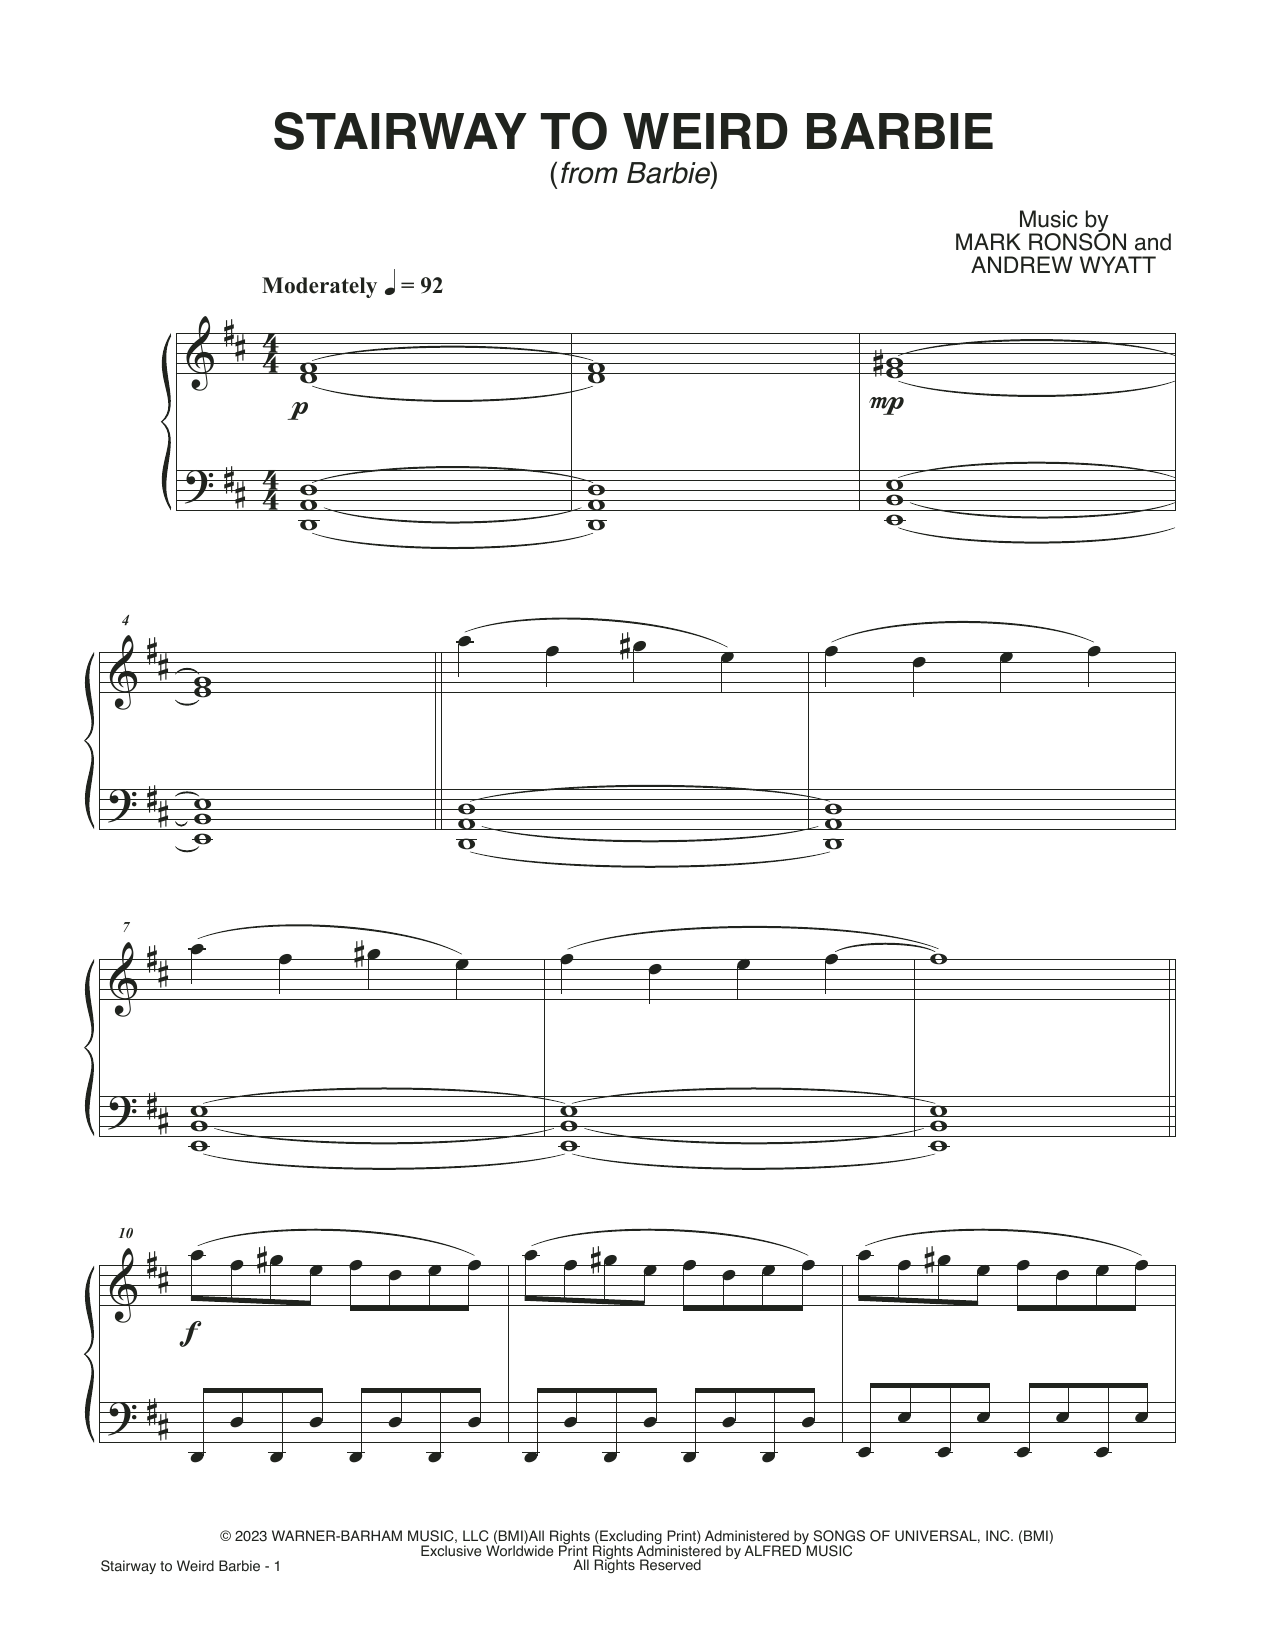 Mark Ronson and Andrew Wyatt Stairway To Weird Barbie (from Barbie) sheet music notes printable PDF score